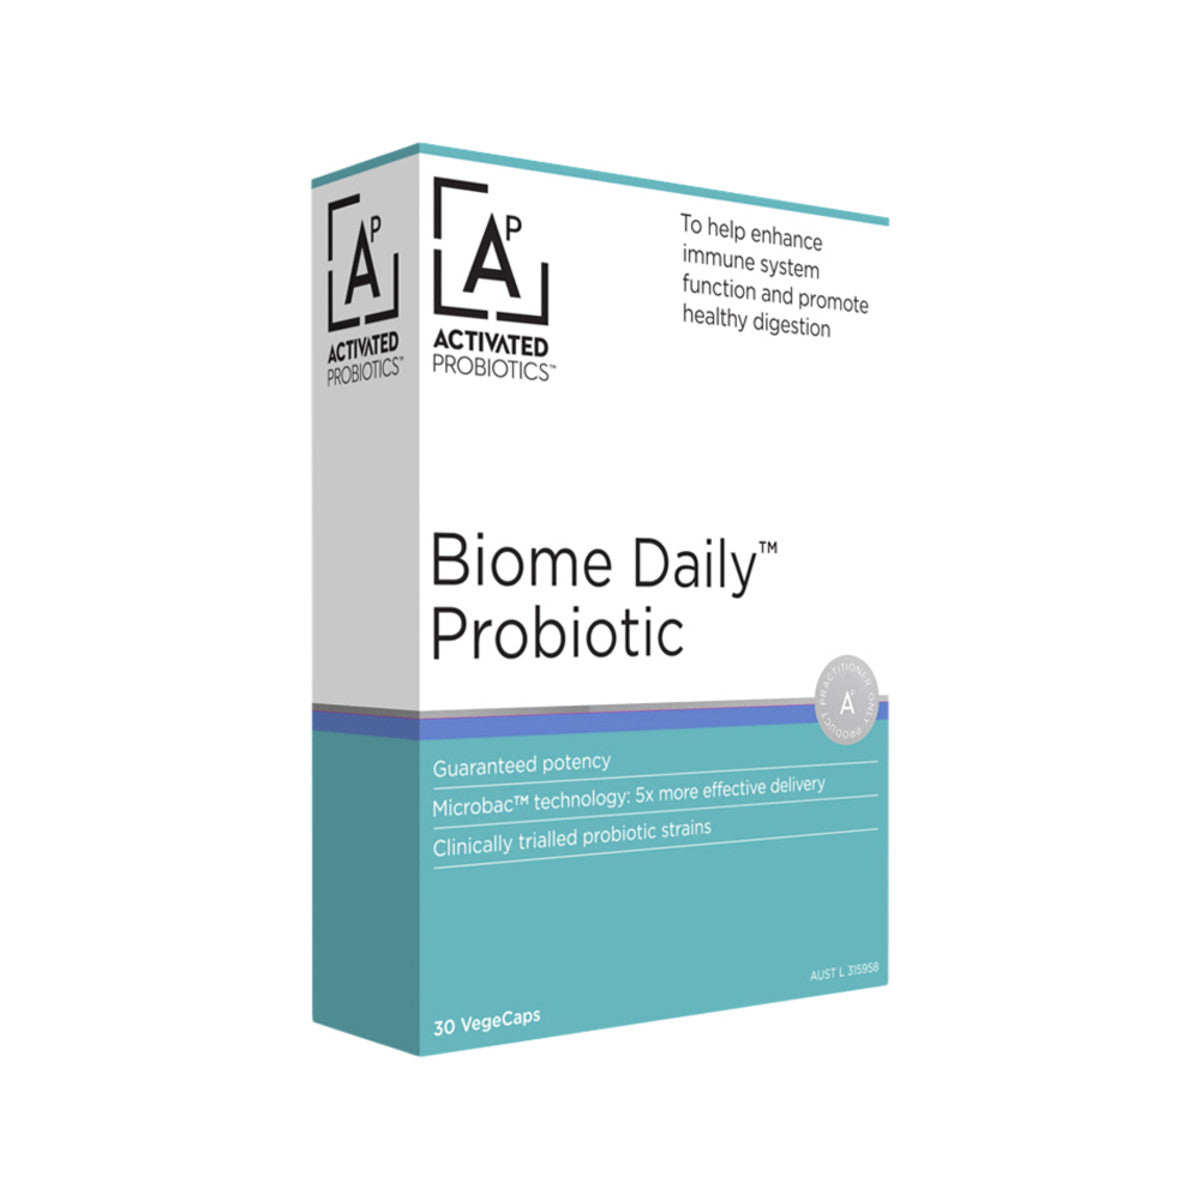 Biome Daily Probiotic